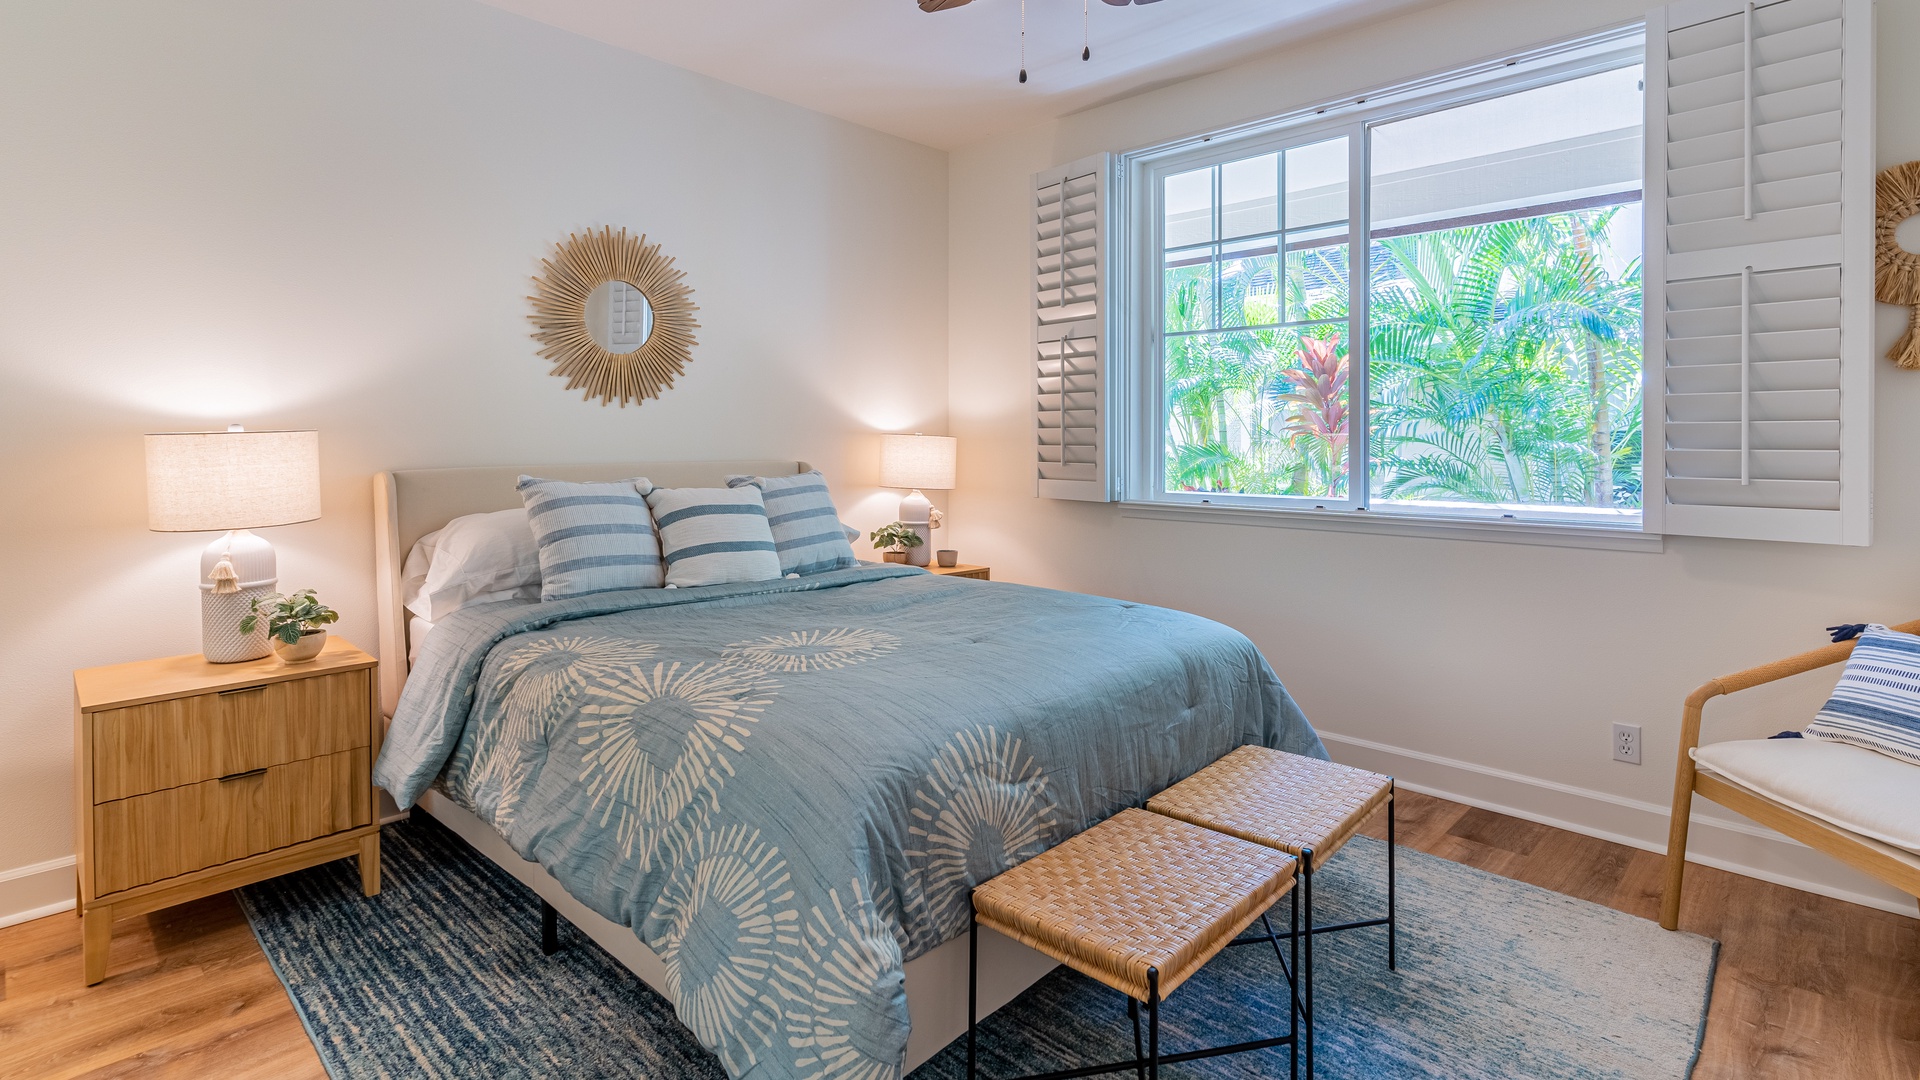 Kapolei Vacation Rentals, Ko Olina Kai 1033A - The second guest bedroom with natural lighting and soft blue tones.